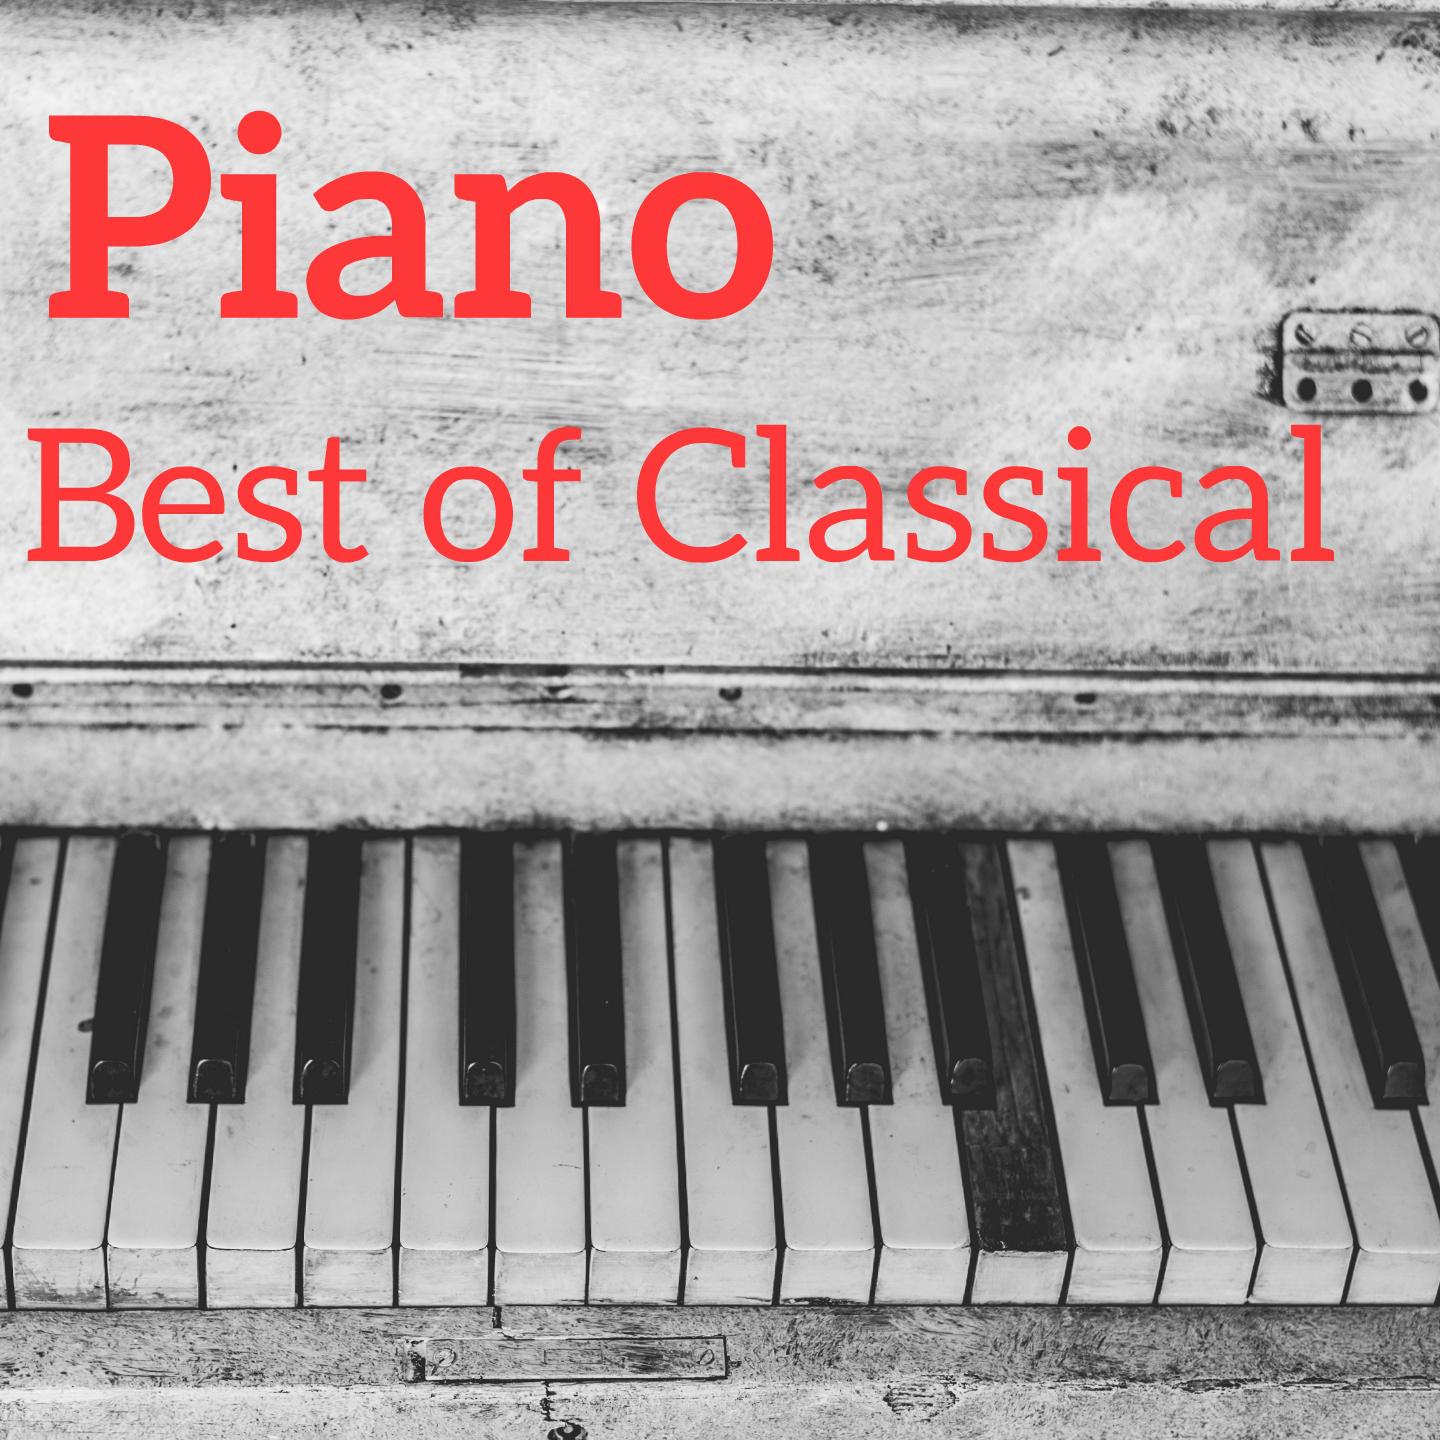 Piano Best of Classical